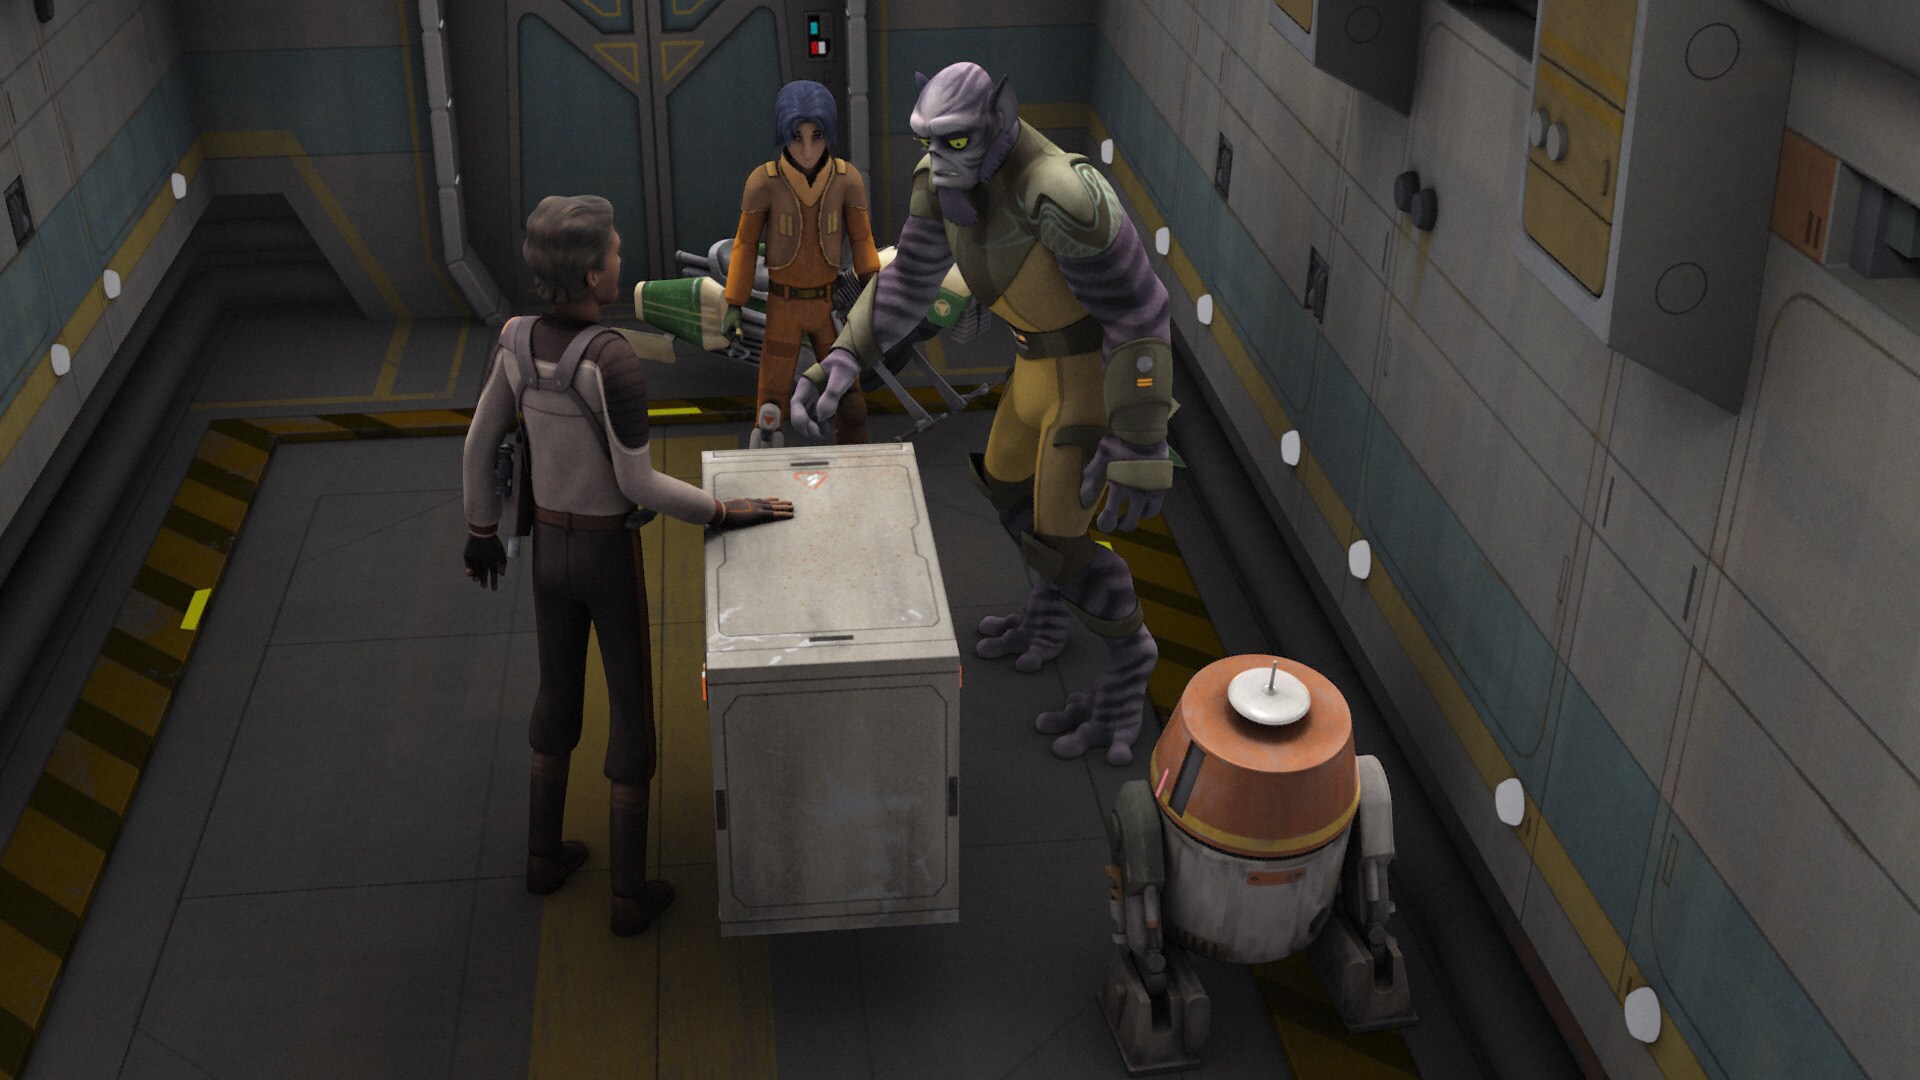 While Hera and Kanan feel double-crossed, the Twi'lek goes along with the proceedings. Back on th...